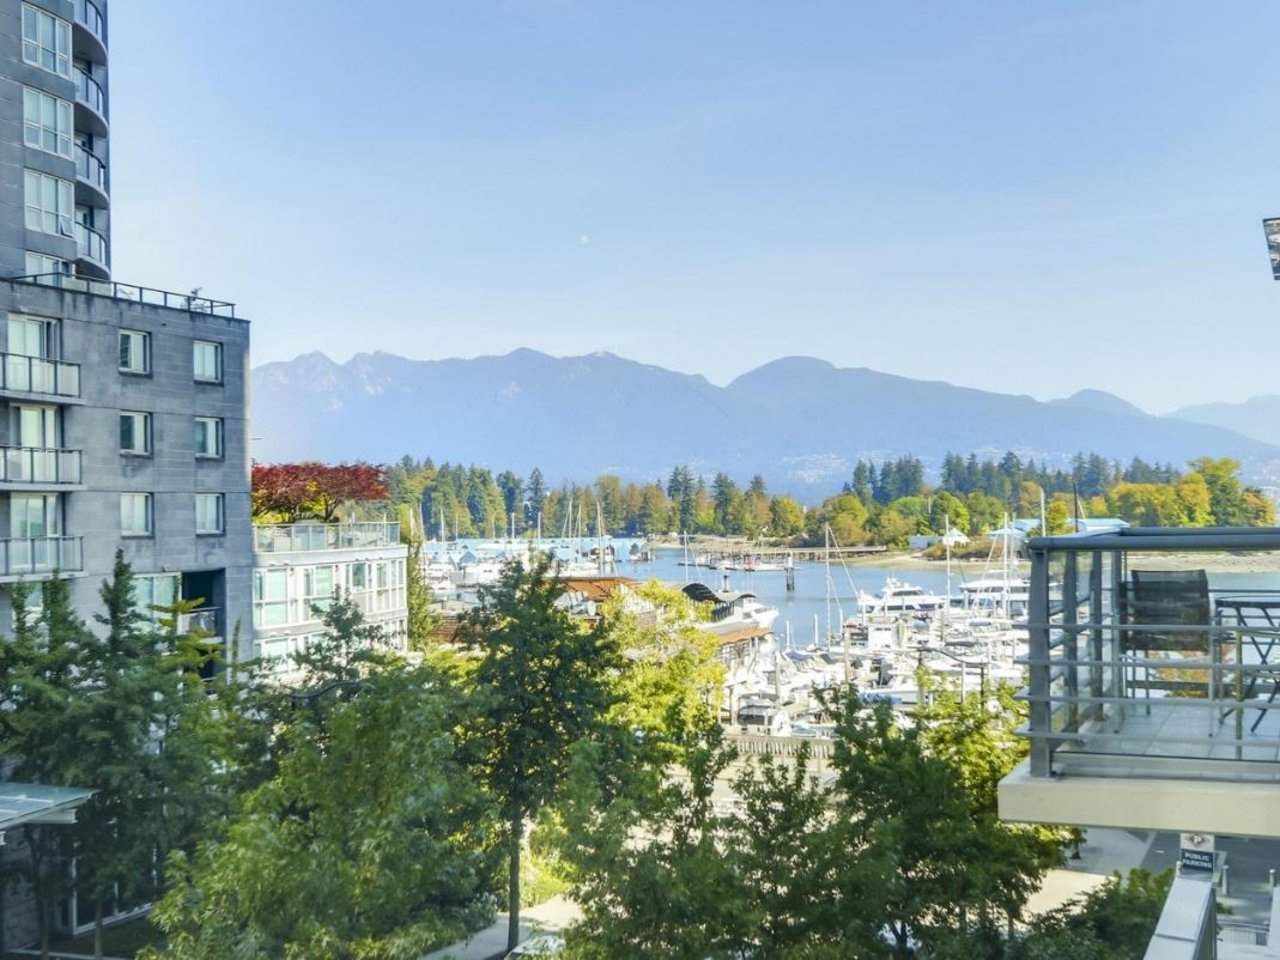 Main Photo: 406 590 NICOLA STREET in Vancouver: Coal Harbour Condo for sale (Vancouver West)  : MLS®# R2302772